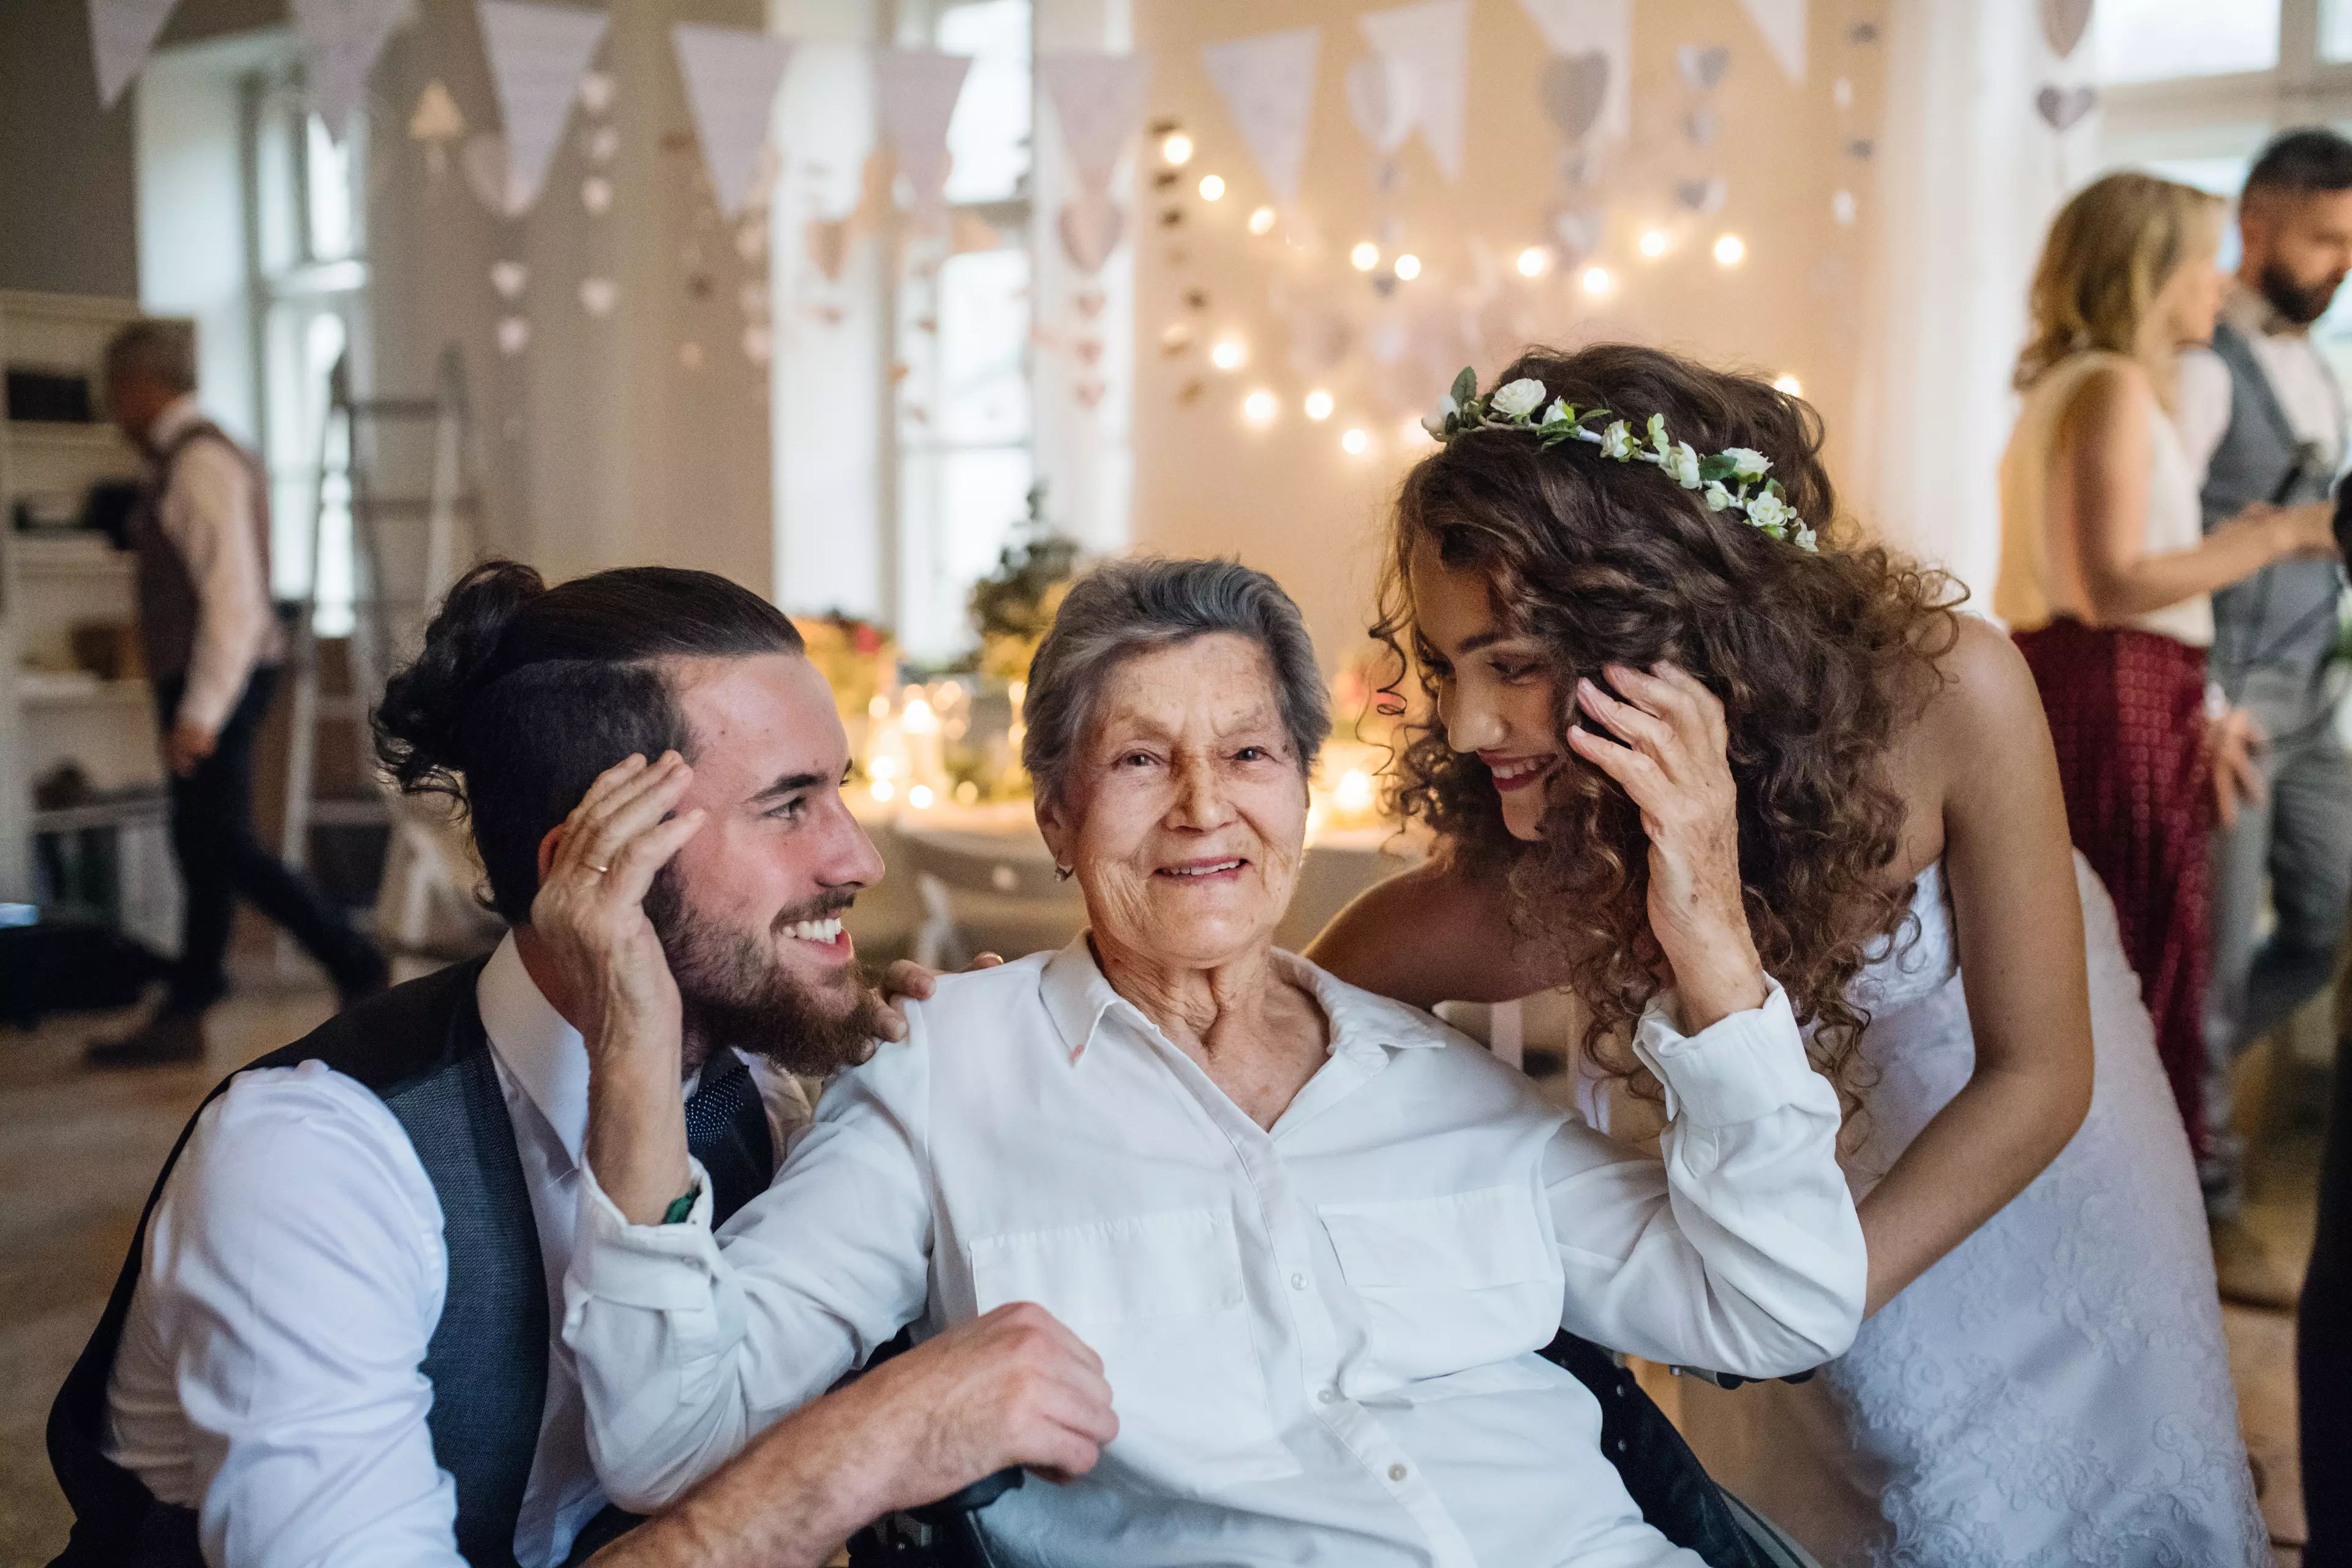 The bride-to-be said that she doesn't want the 98-year-old grandmother at the wedding reception (